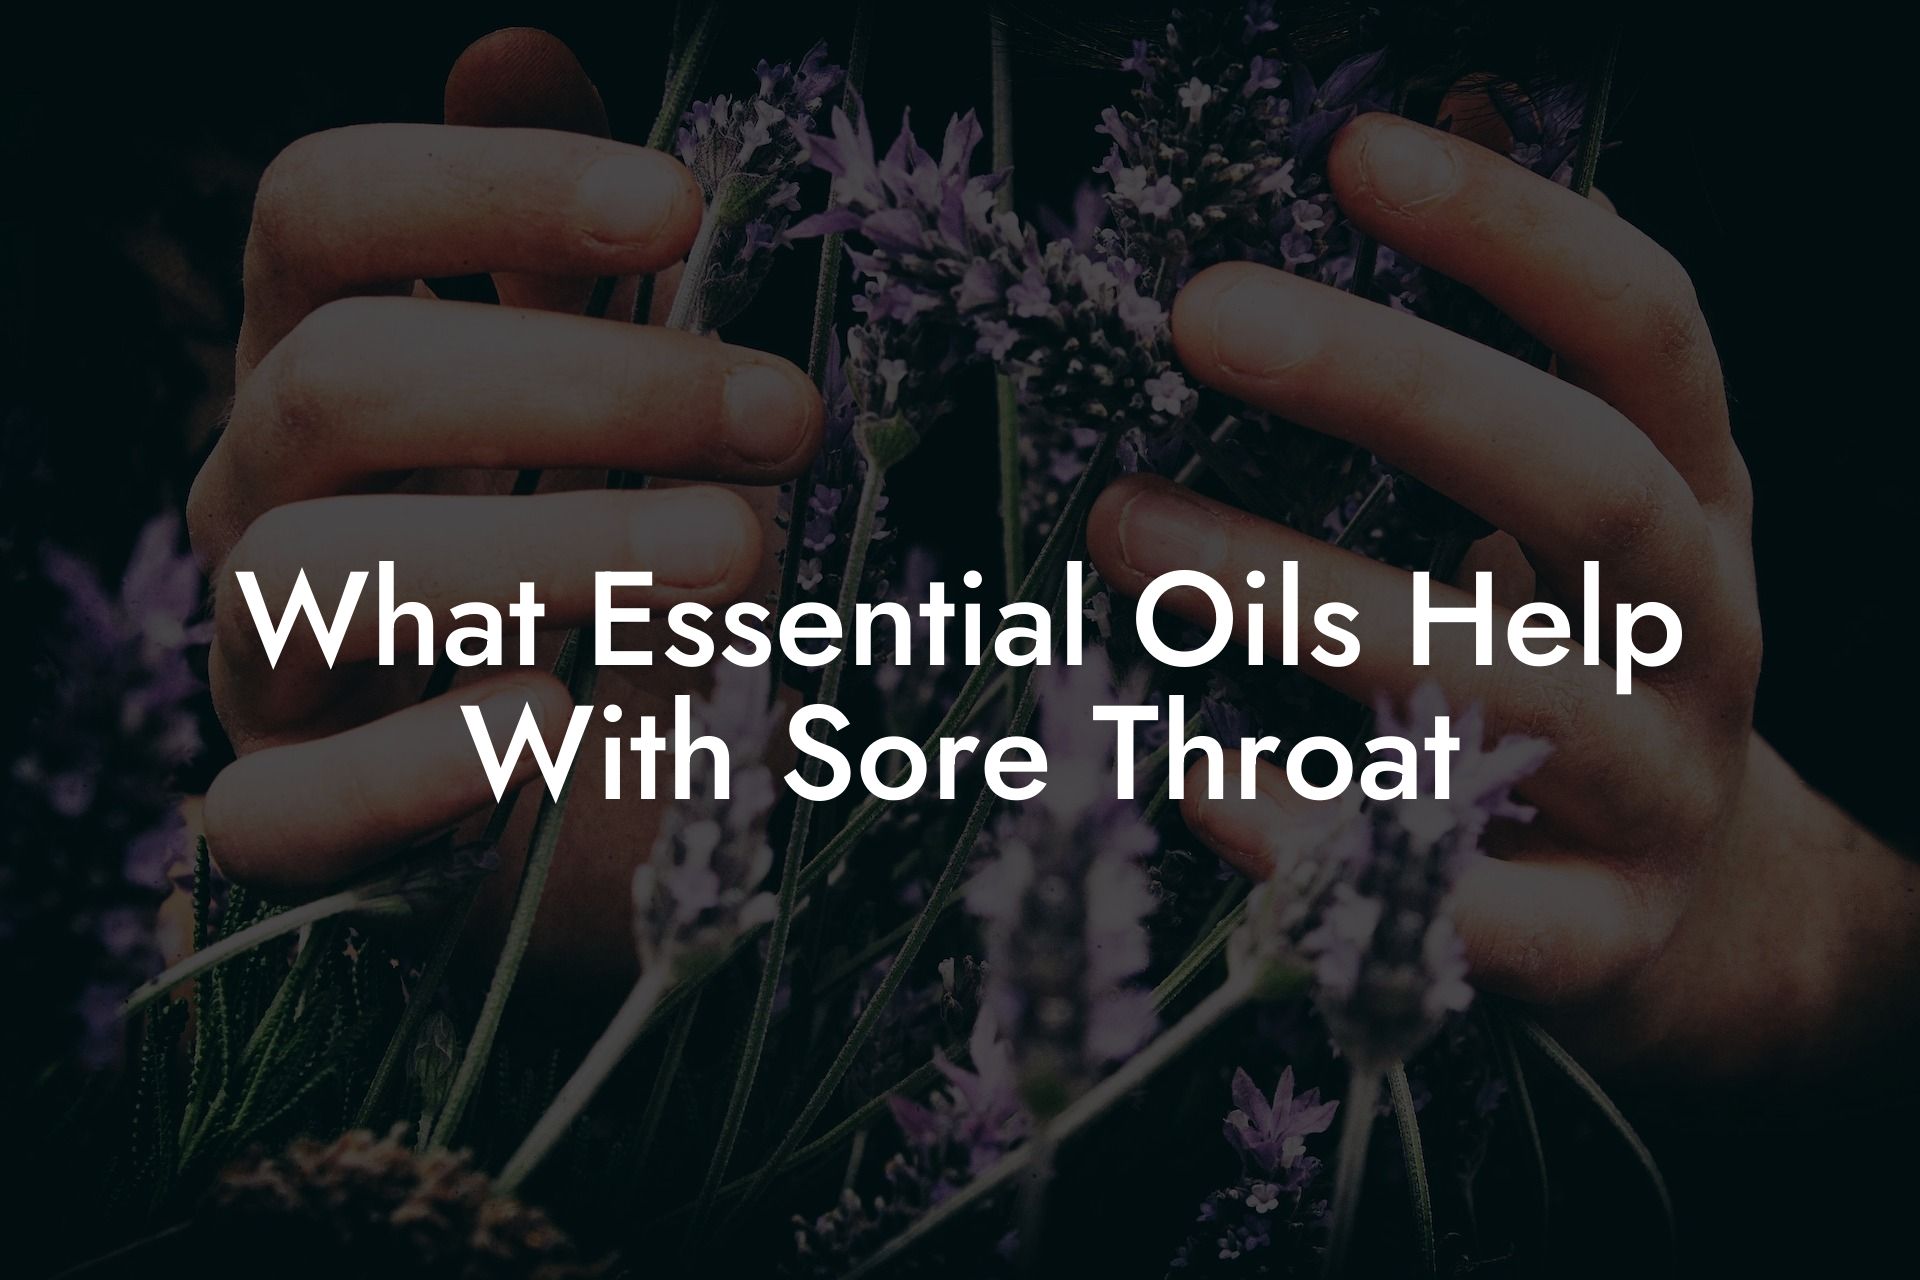 What Essential Oils Help With Sore Throat